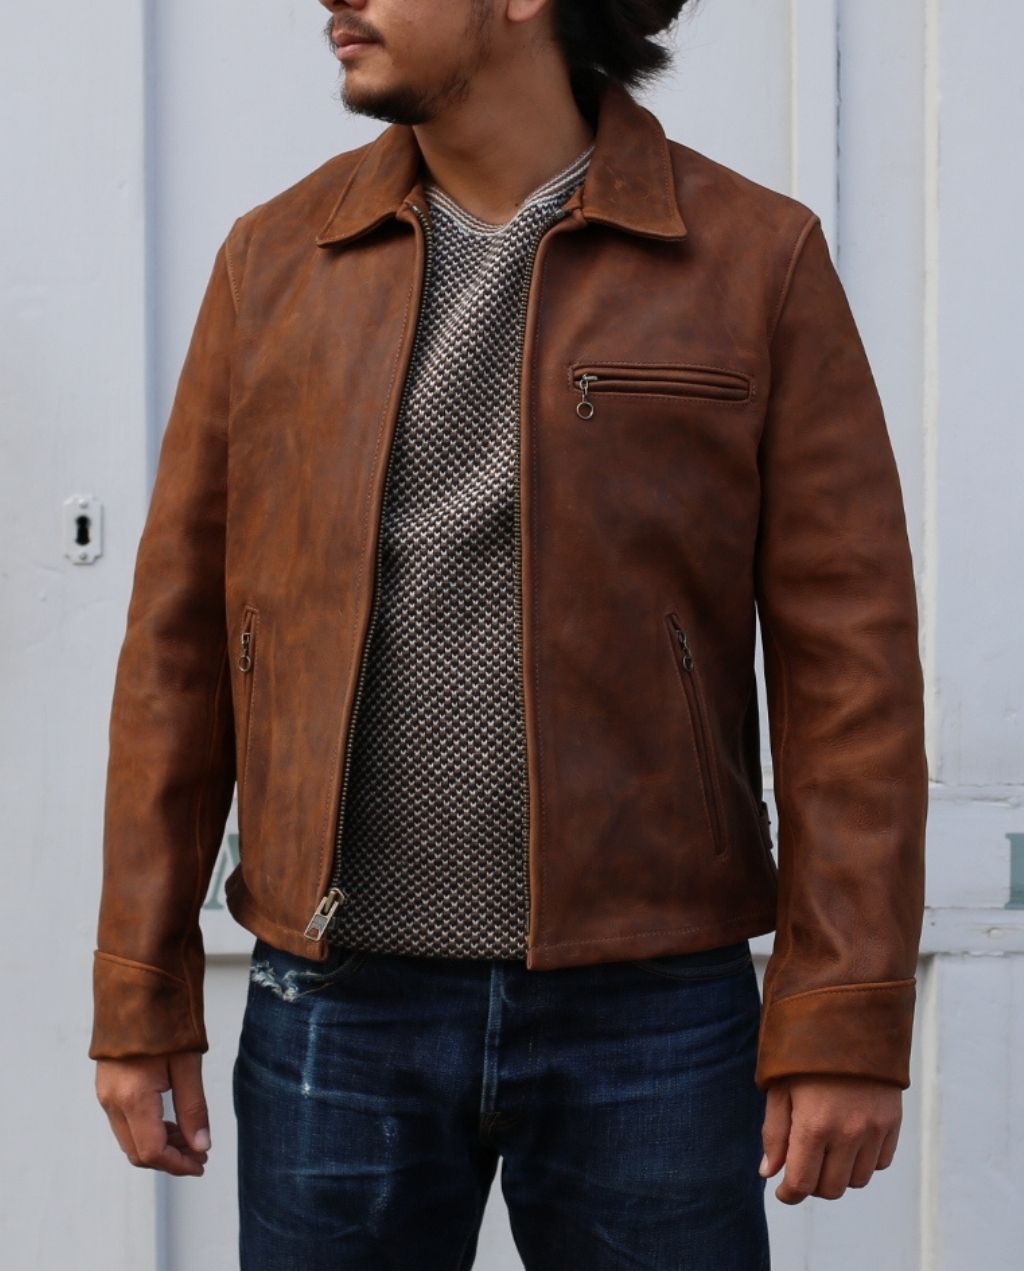 STORM P673 - HEAVYWEIGHT OILED NUBUCK LEATHER DELIVERY JACKET P673